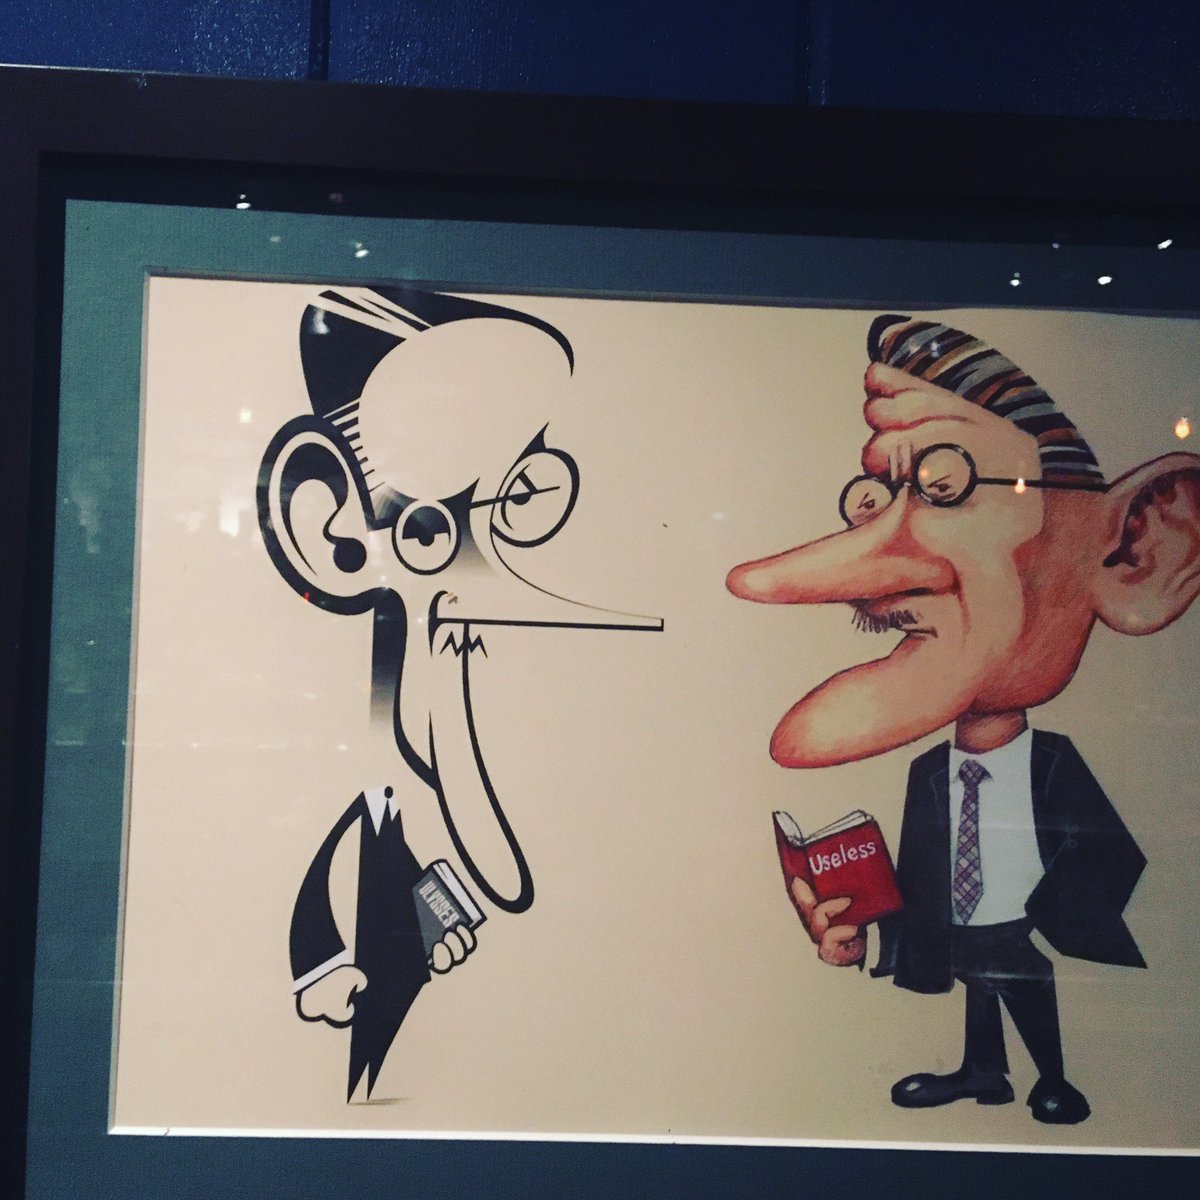 Happened upon this caricature  of T.S.Eliot & James Joyce at Ulysses Pub , Stone Street in Fidi.  Eliot, one of the first critics to write a glowing response in the 1930’s to the highly controversial novel by Joyce, “Ulysses”.  
#jamesjoyce #tseliot #ulysses #modernliterature